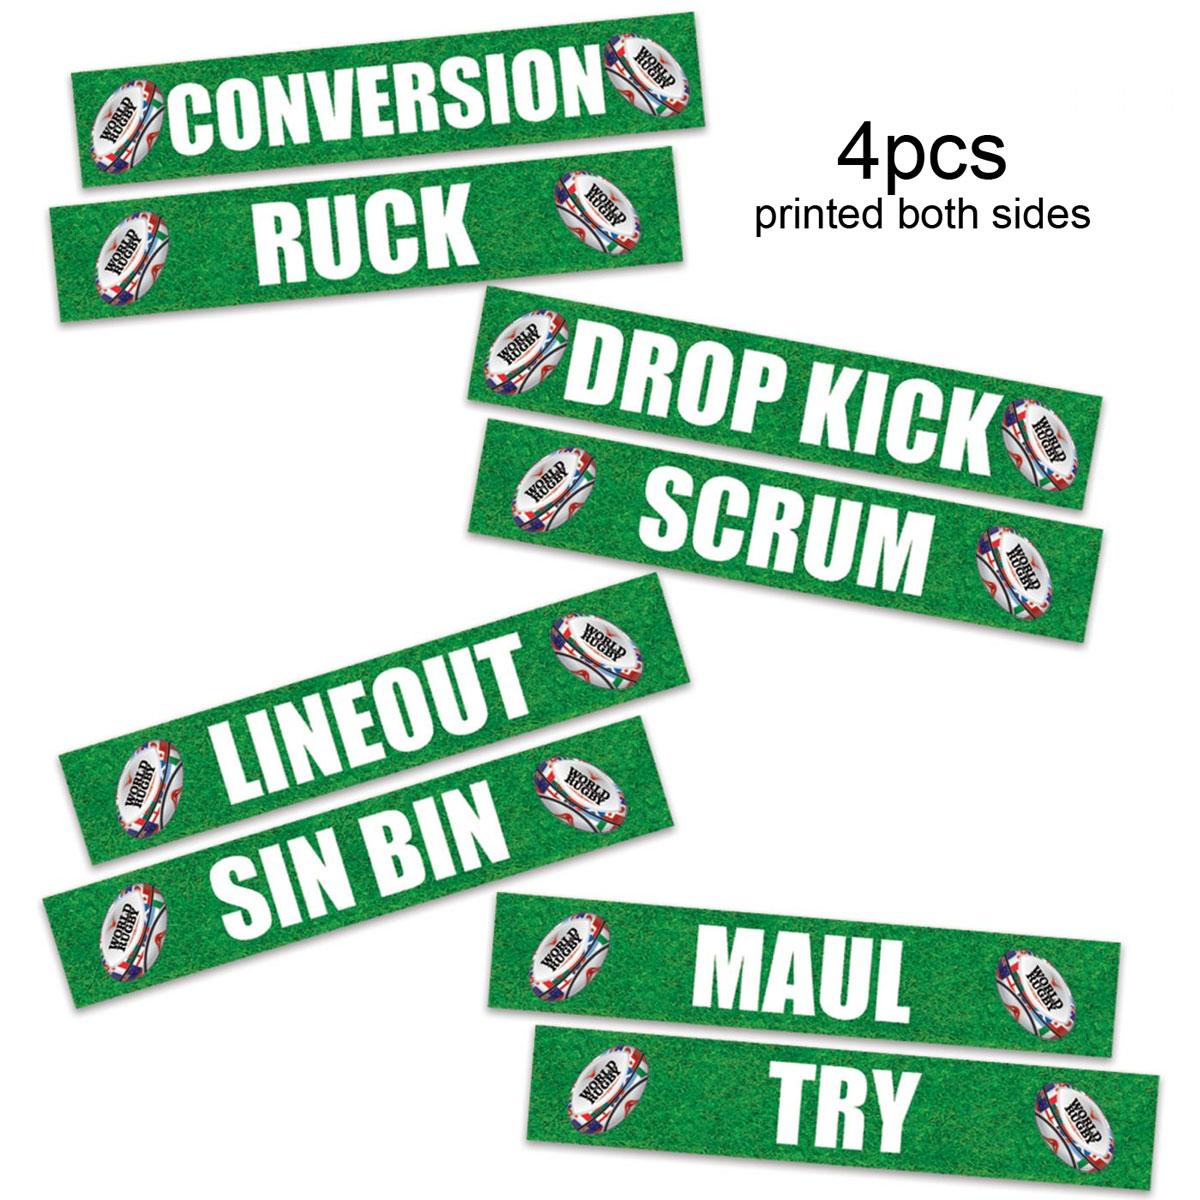 Pk 4 Rugby Phrase Cutout Decorations by Beistle ZSI00029HP available here at Karnival Costumes online party shop